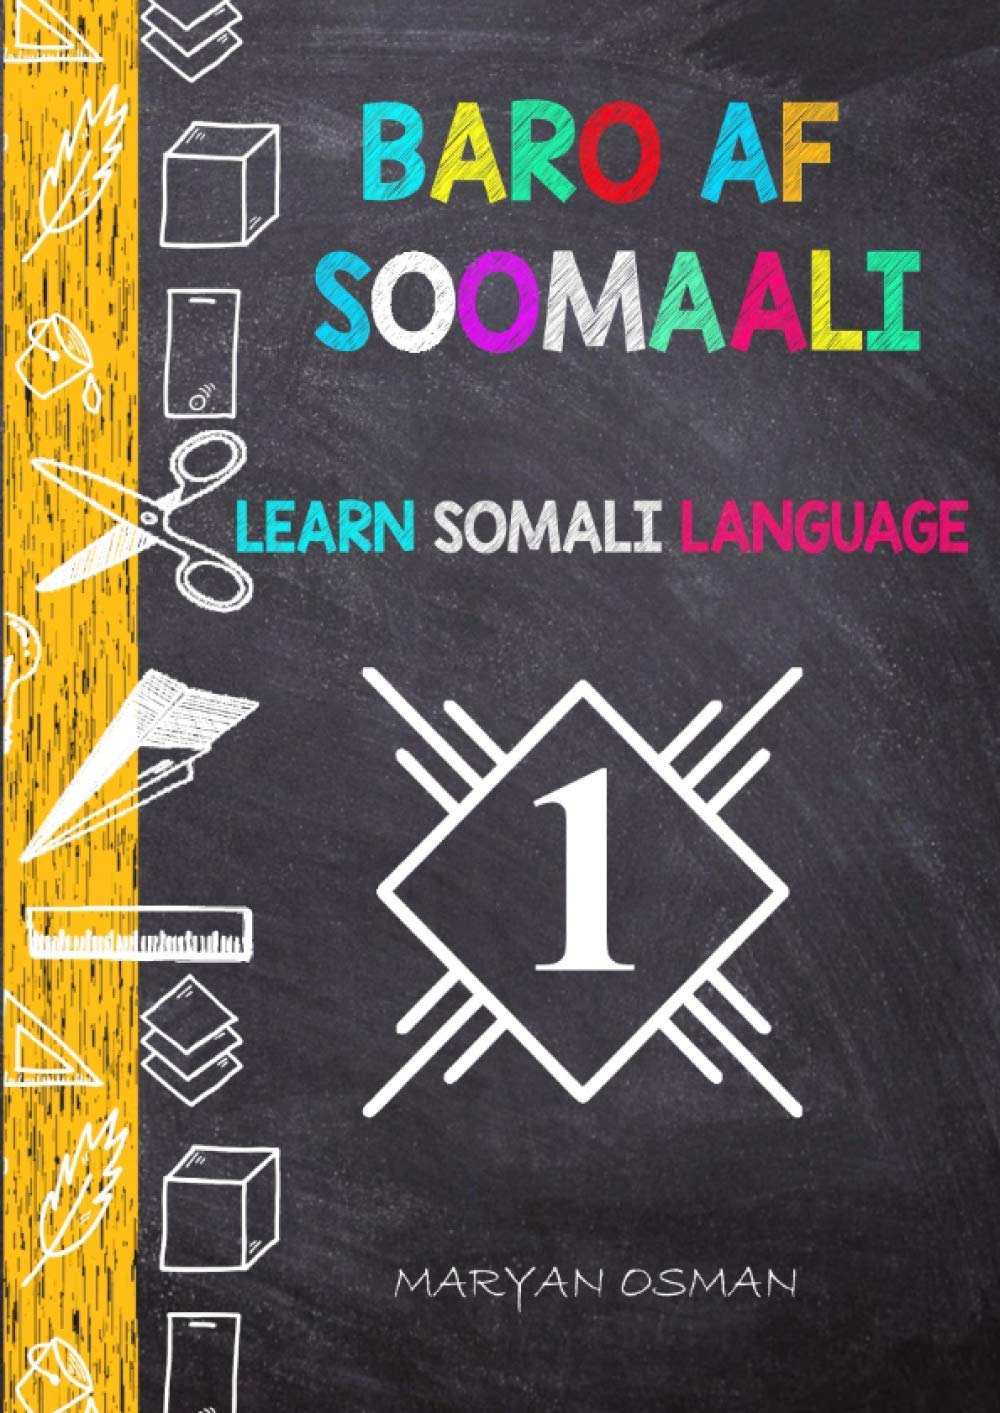 Mastering Somali Language: ‘Learn Somali – Baro Af Soomaali’ – One Of The Best Somali Kid’s Coloring Book for Language Mastery